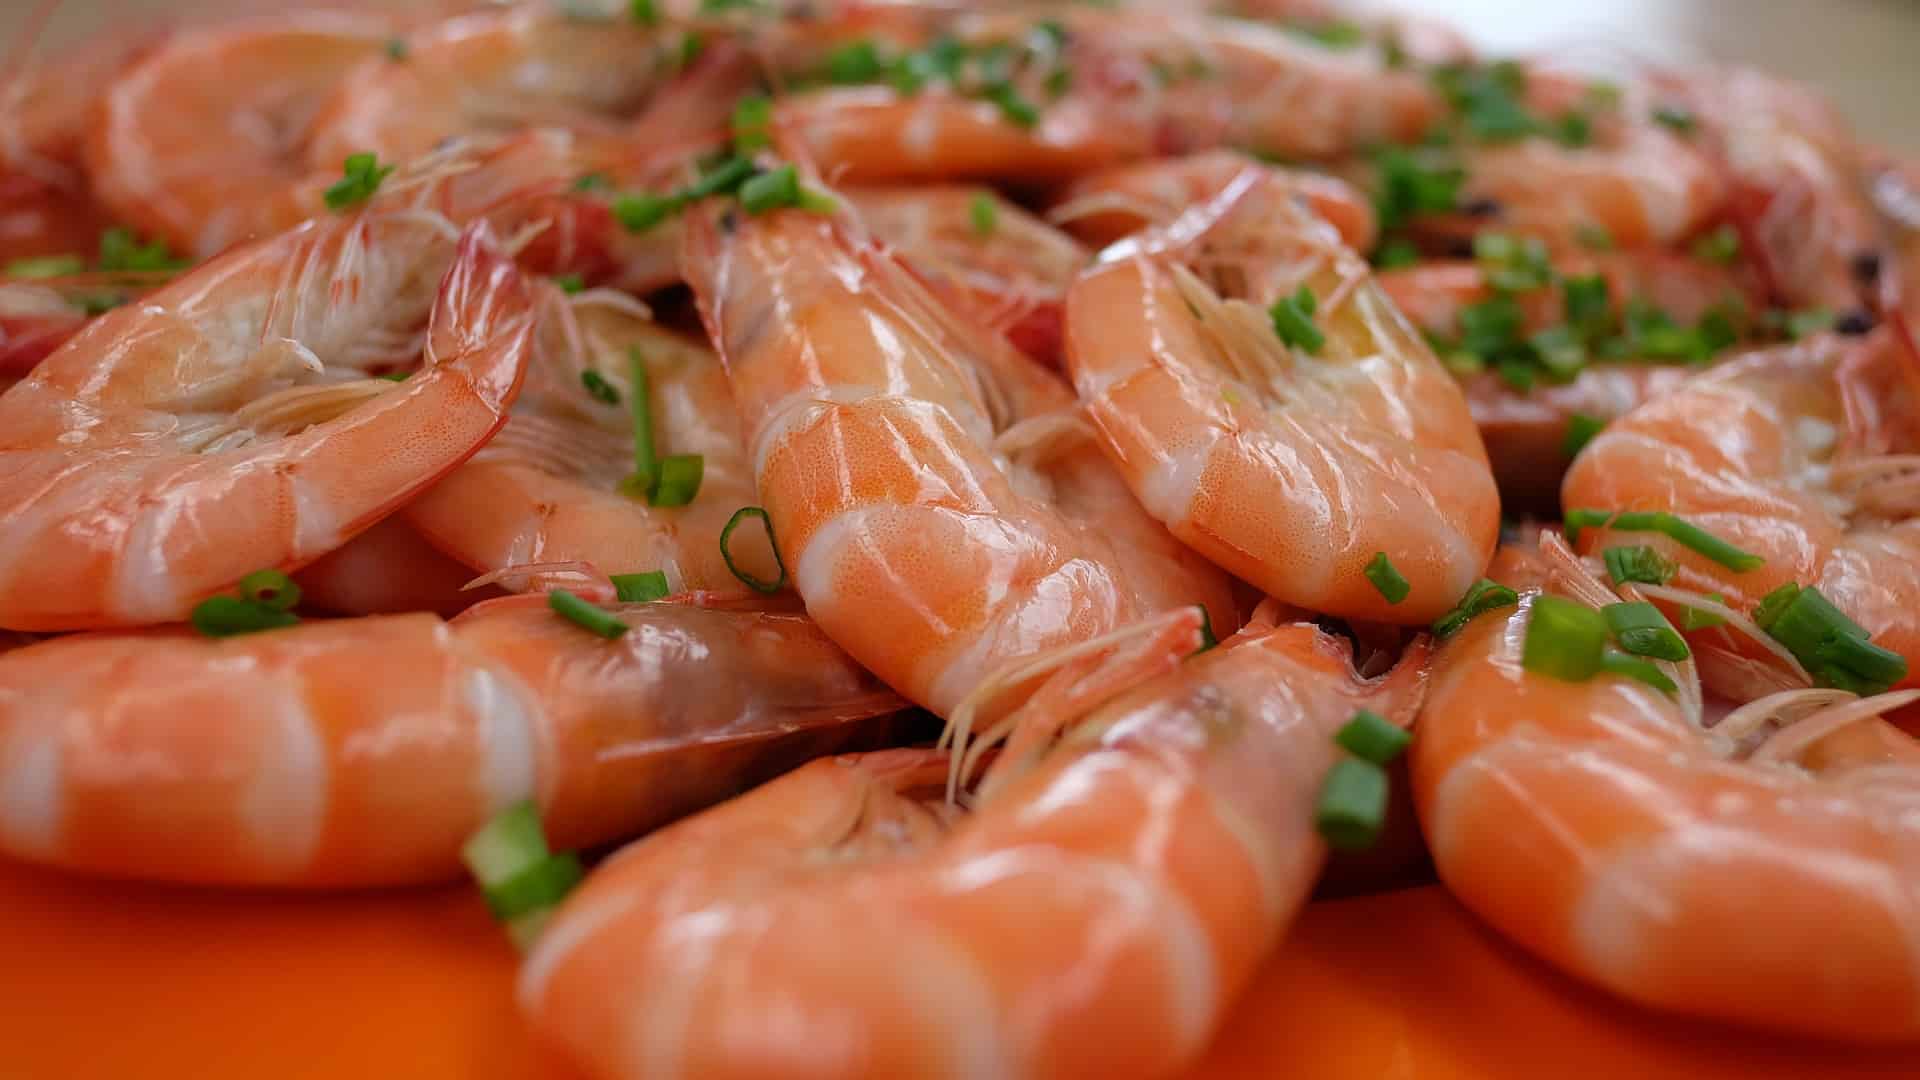 Shrimp on a plate garnished with chives.